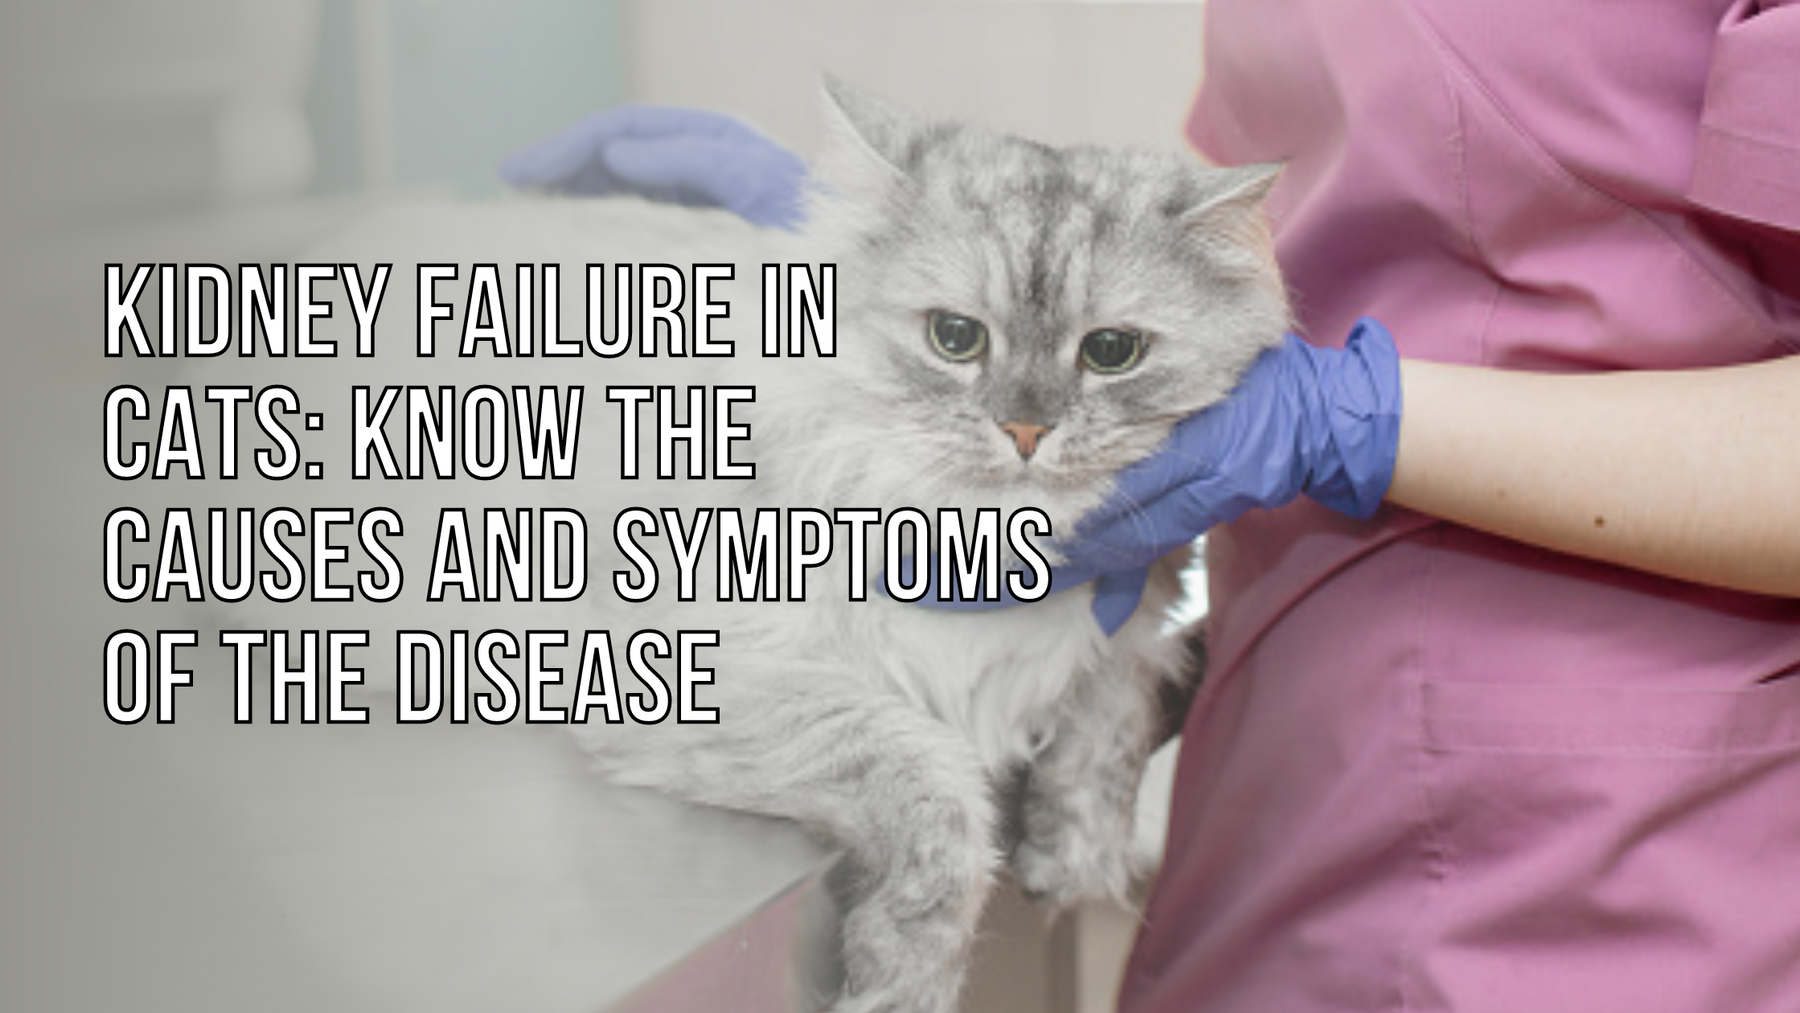 Kidney Failure In Cats: Know The Causes And Symptoms Of The Disease